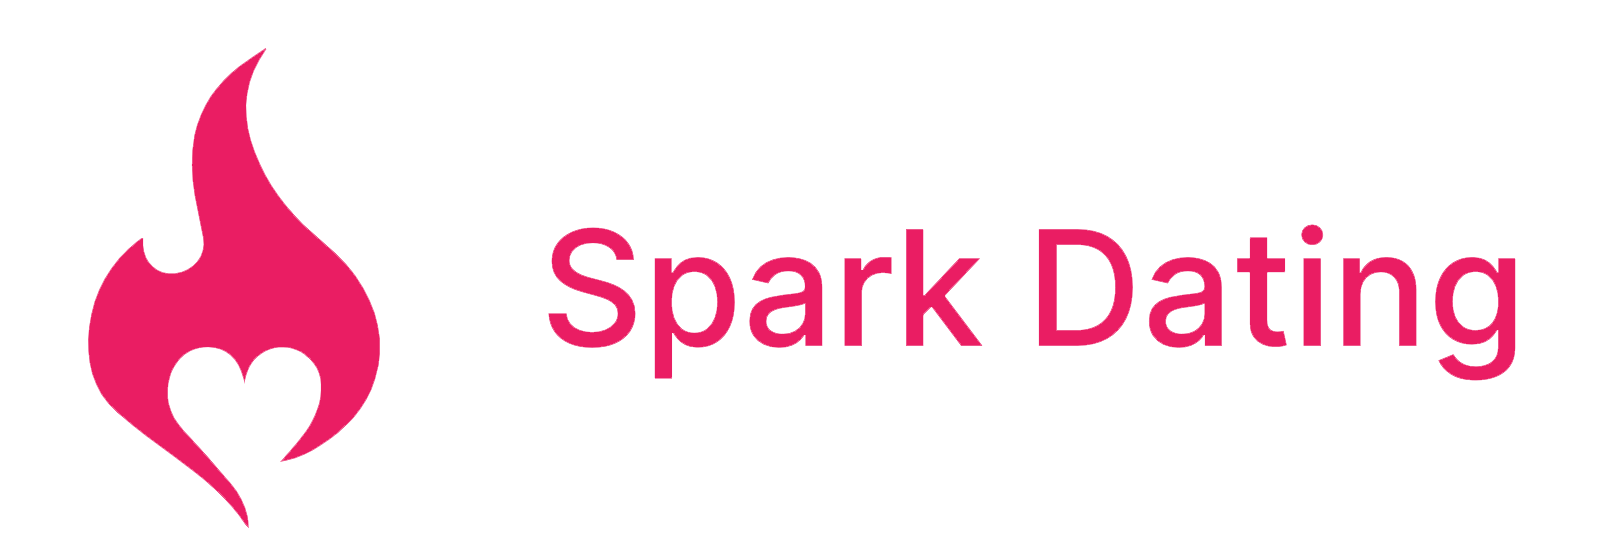 The logo of Spark Dating